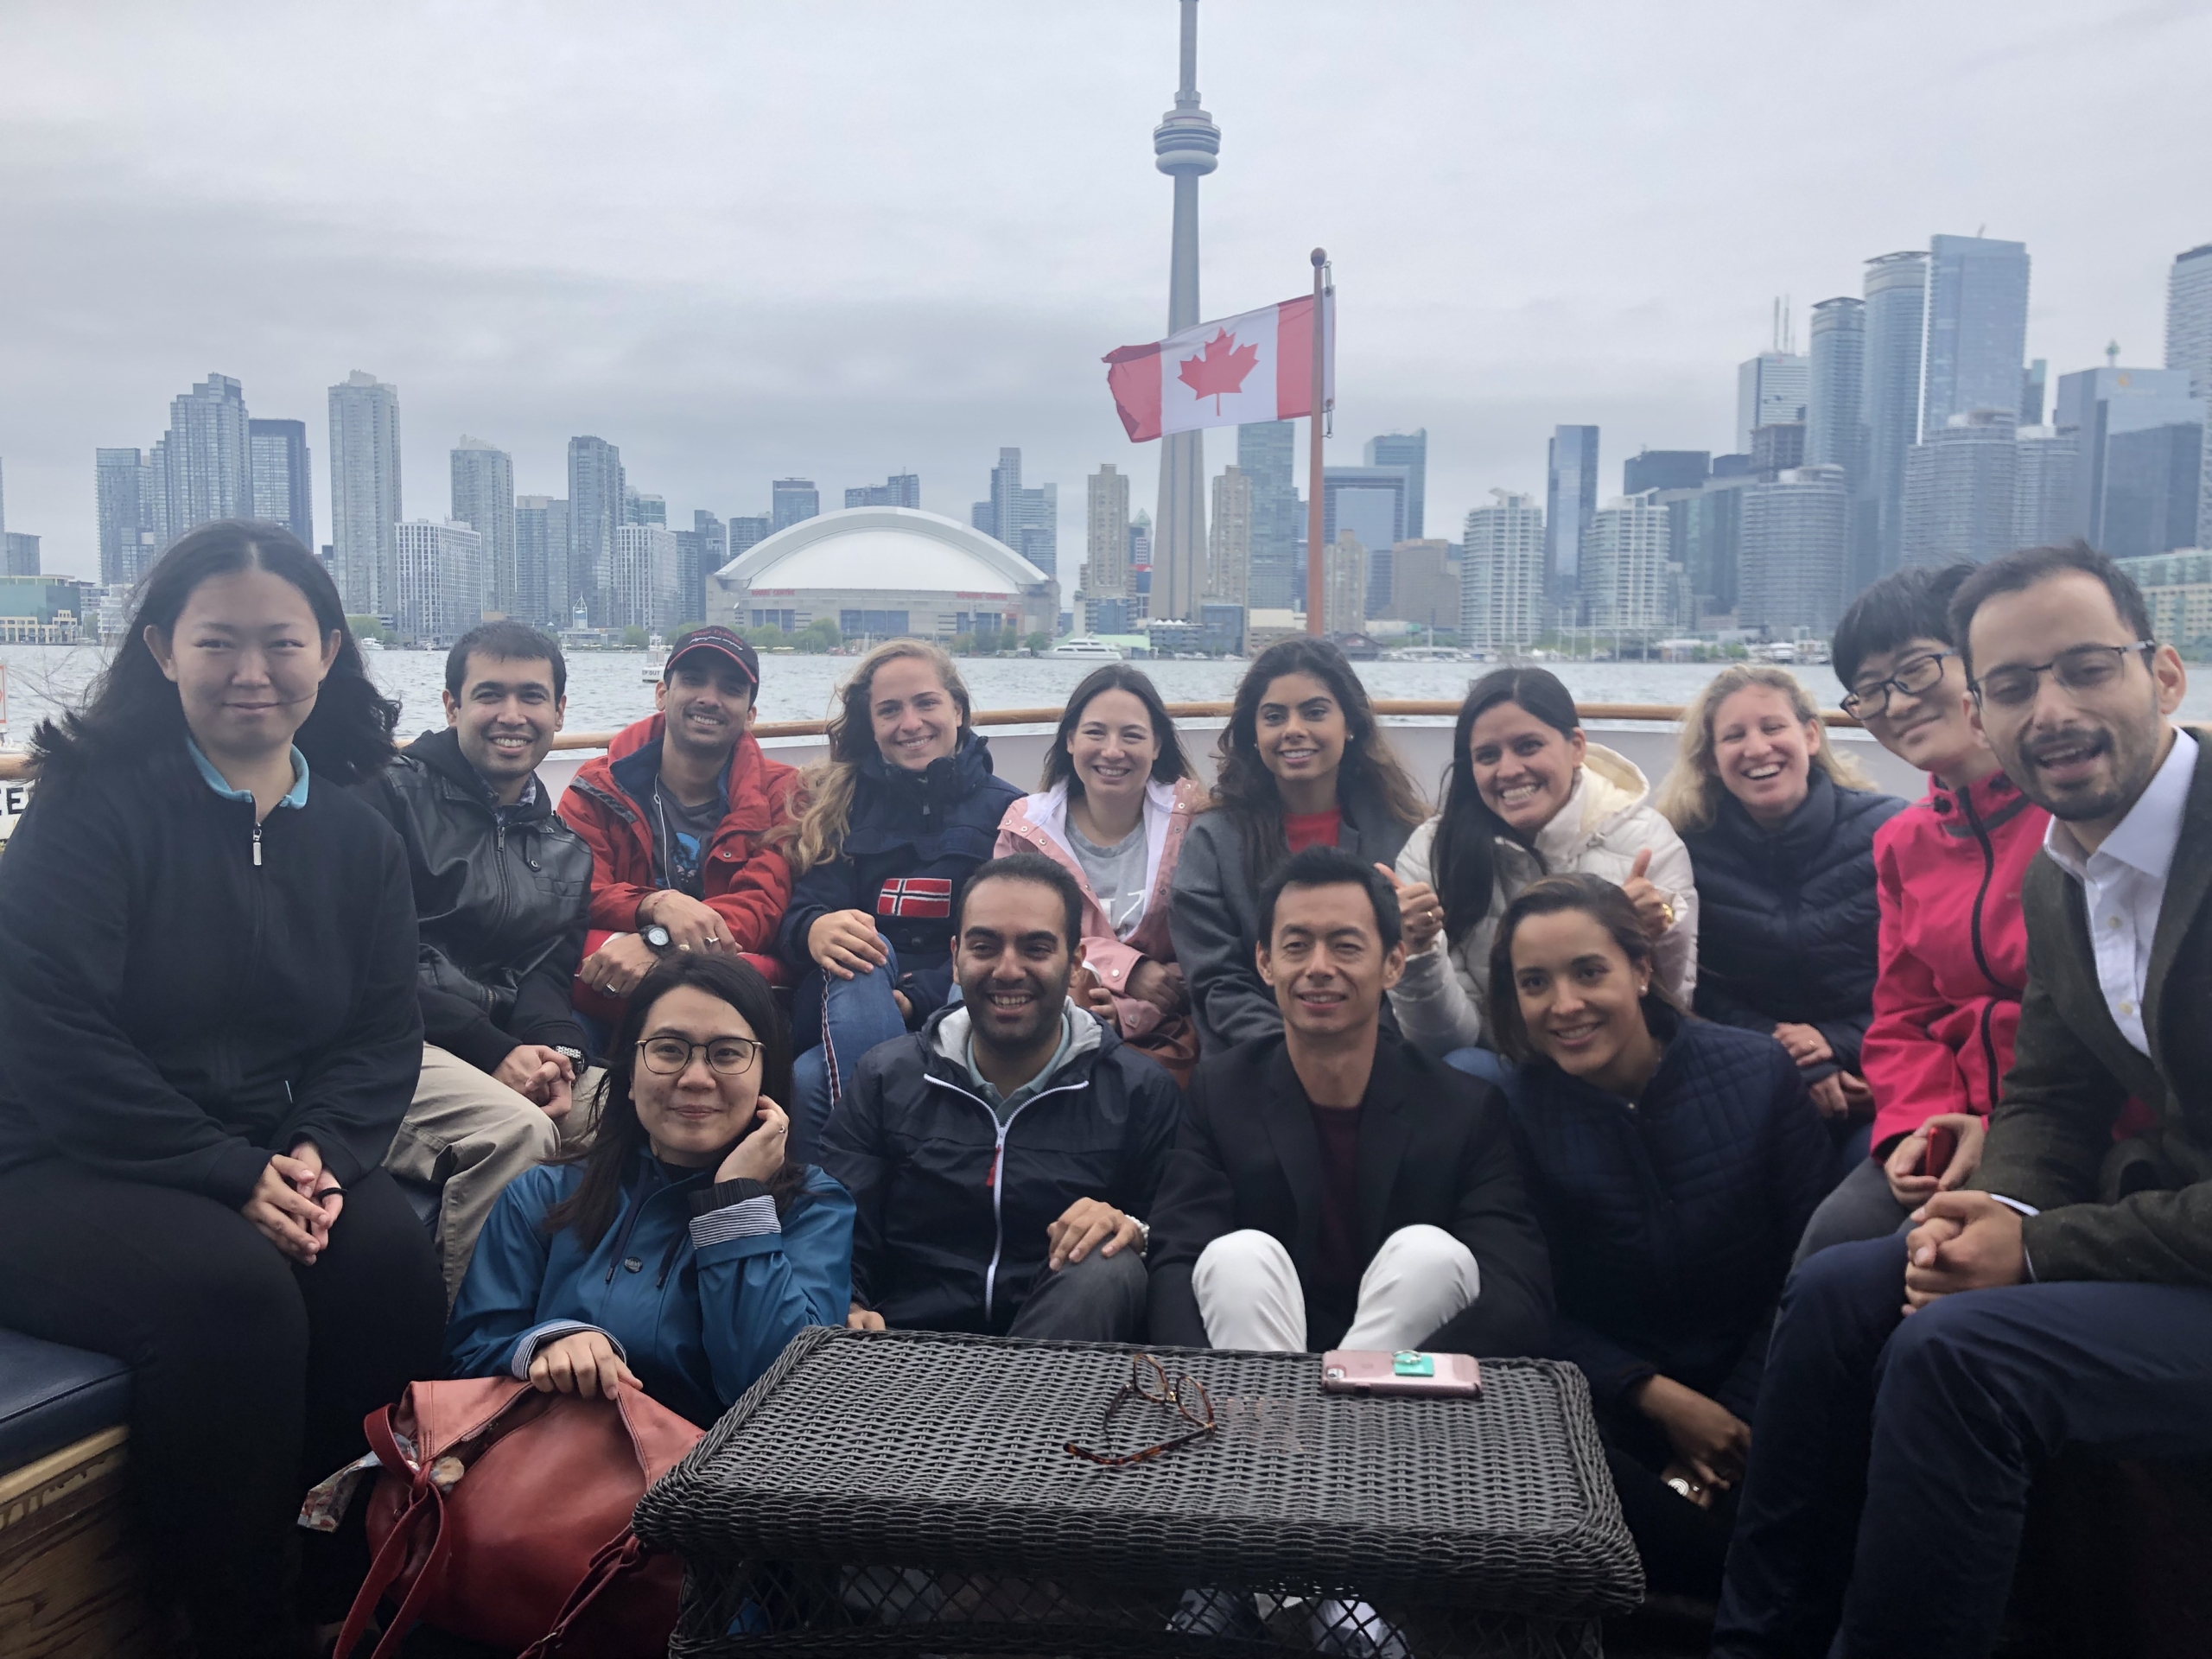 Group photo of students on boat cruise during 2 week summer program in Toronto